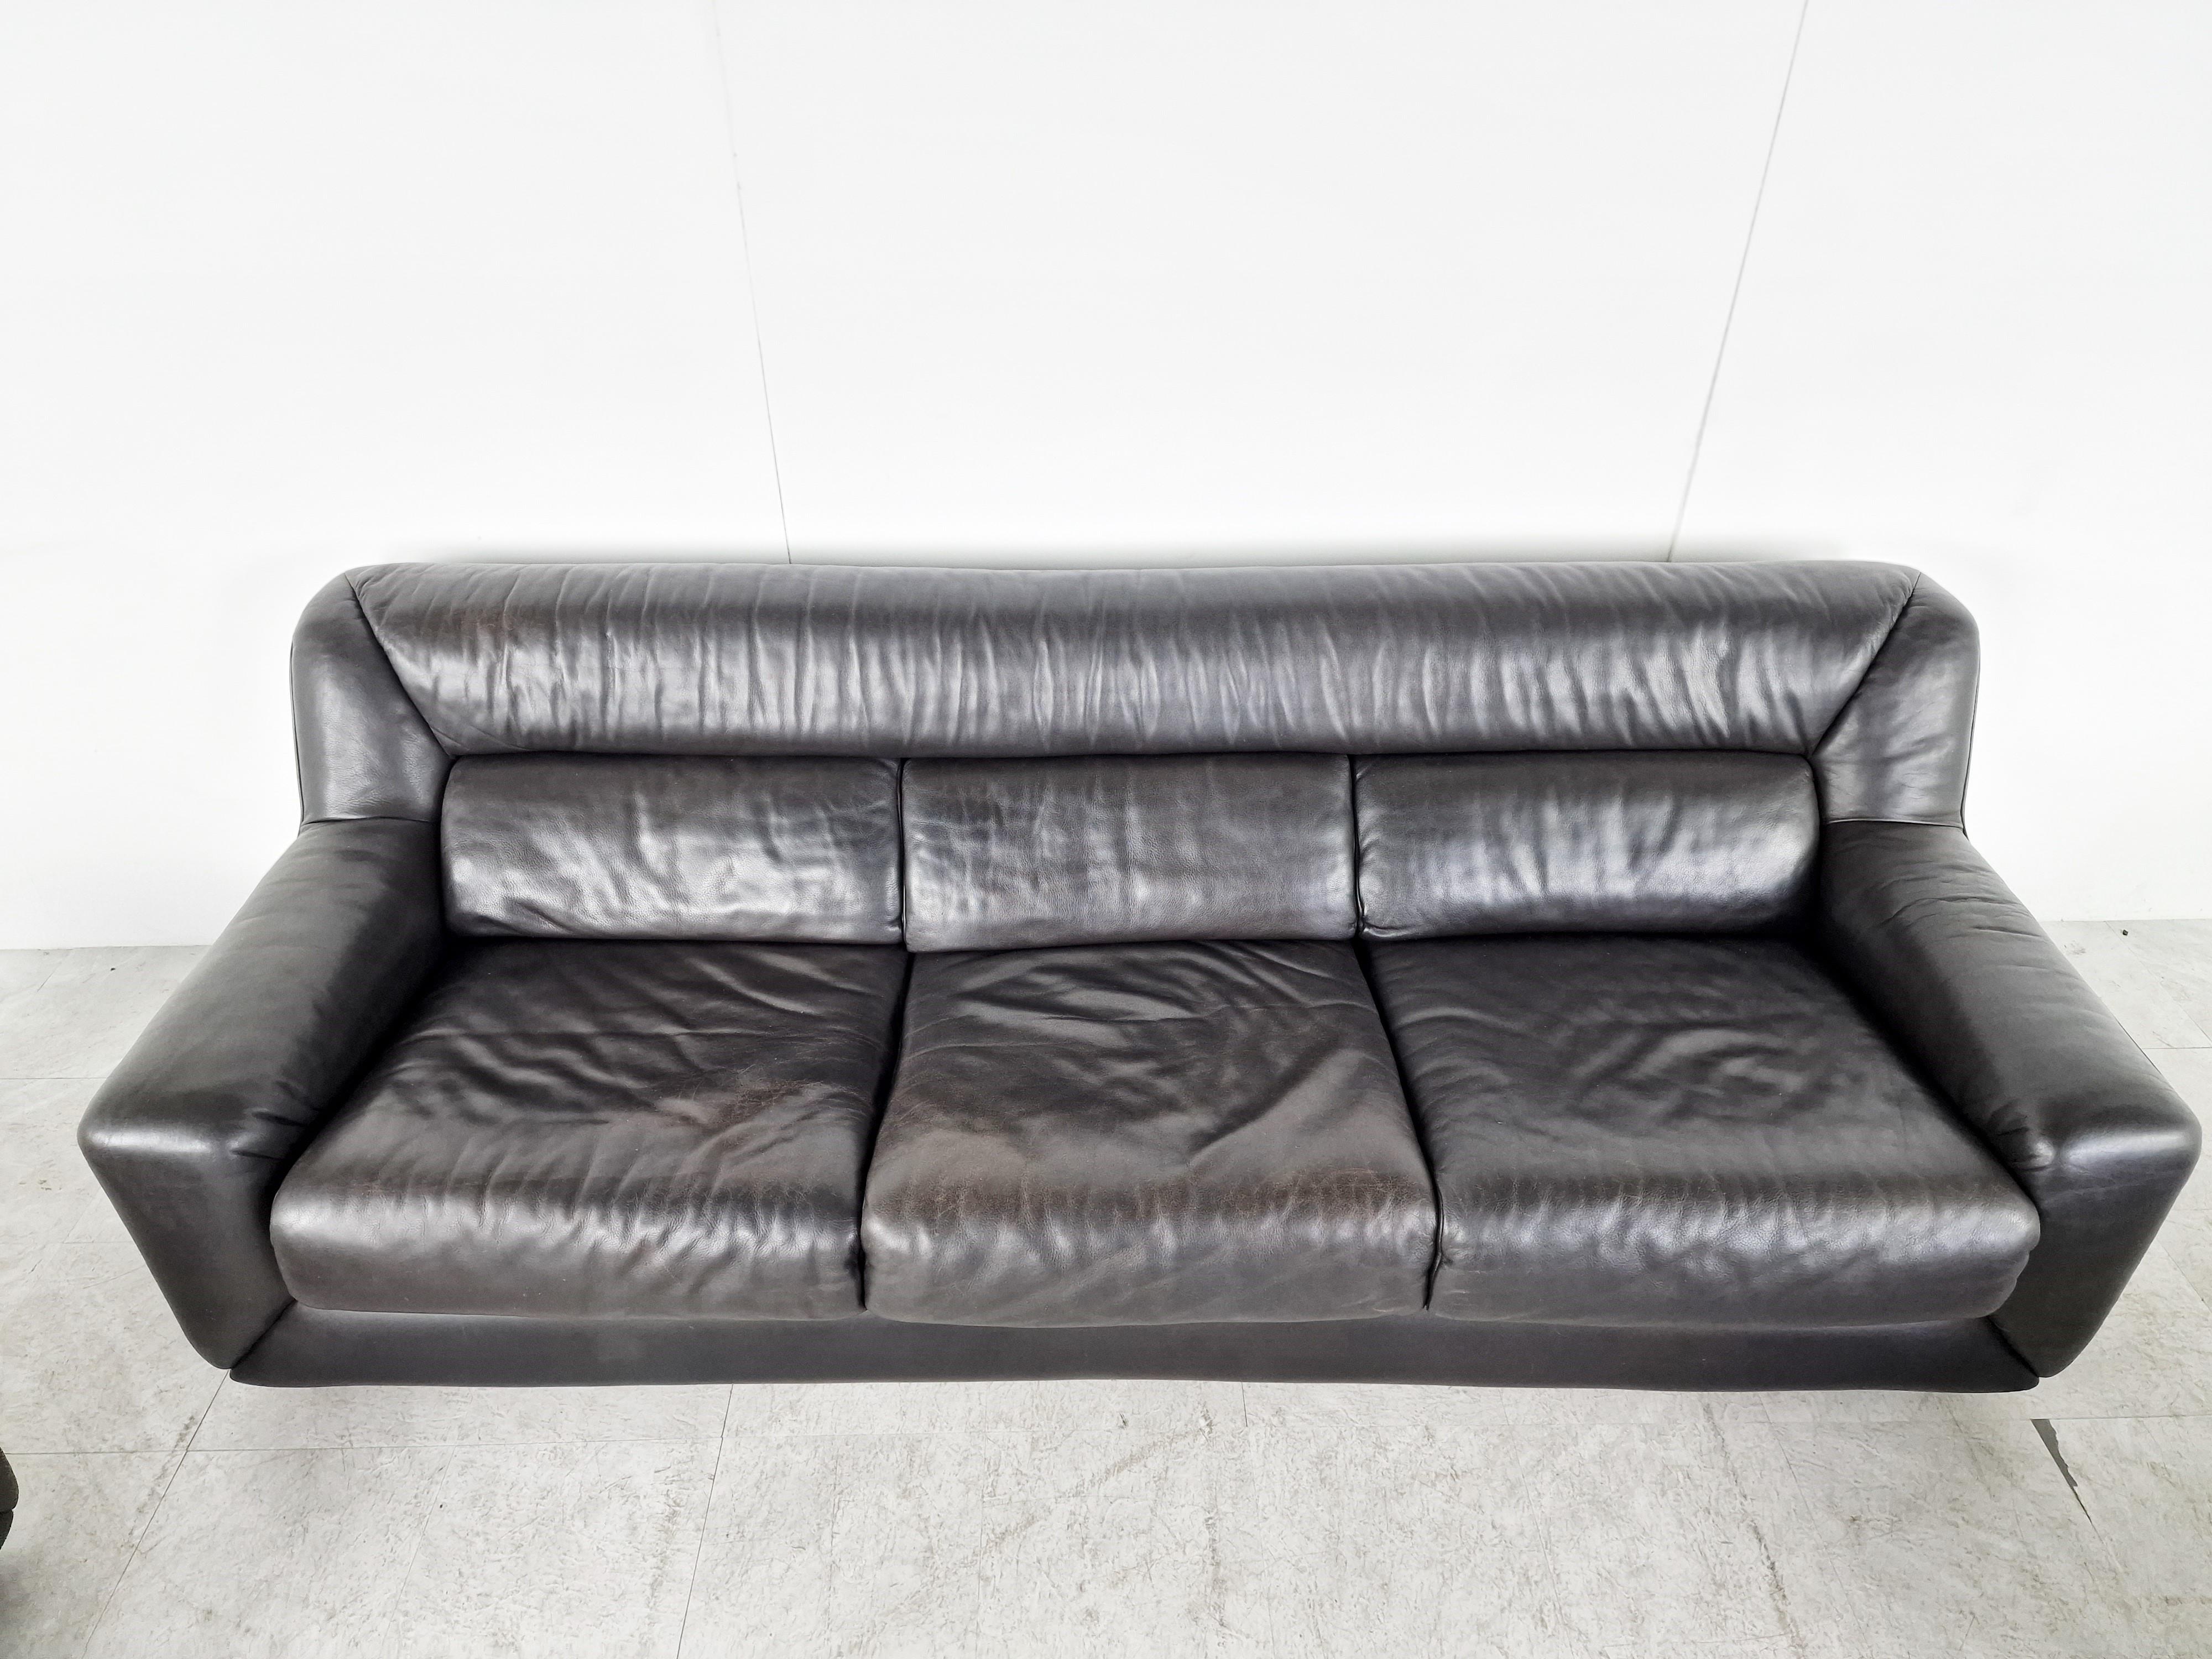 Vintage black leather sofa set model DS42 by Desede of Switzerland.

The set consists of one 3 seater sofa and two armchairs 

Good overall condition with normal age related wear.

1970s - Switzerland

Dimensions: (each element)
Three